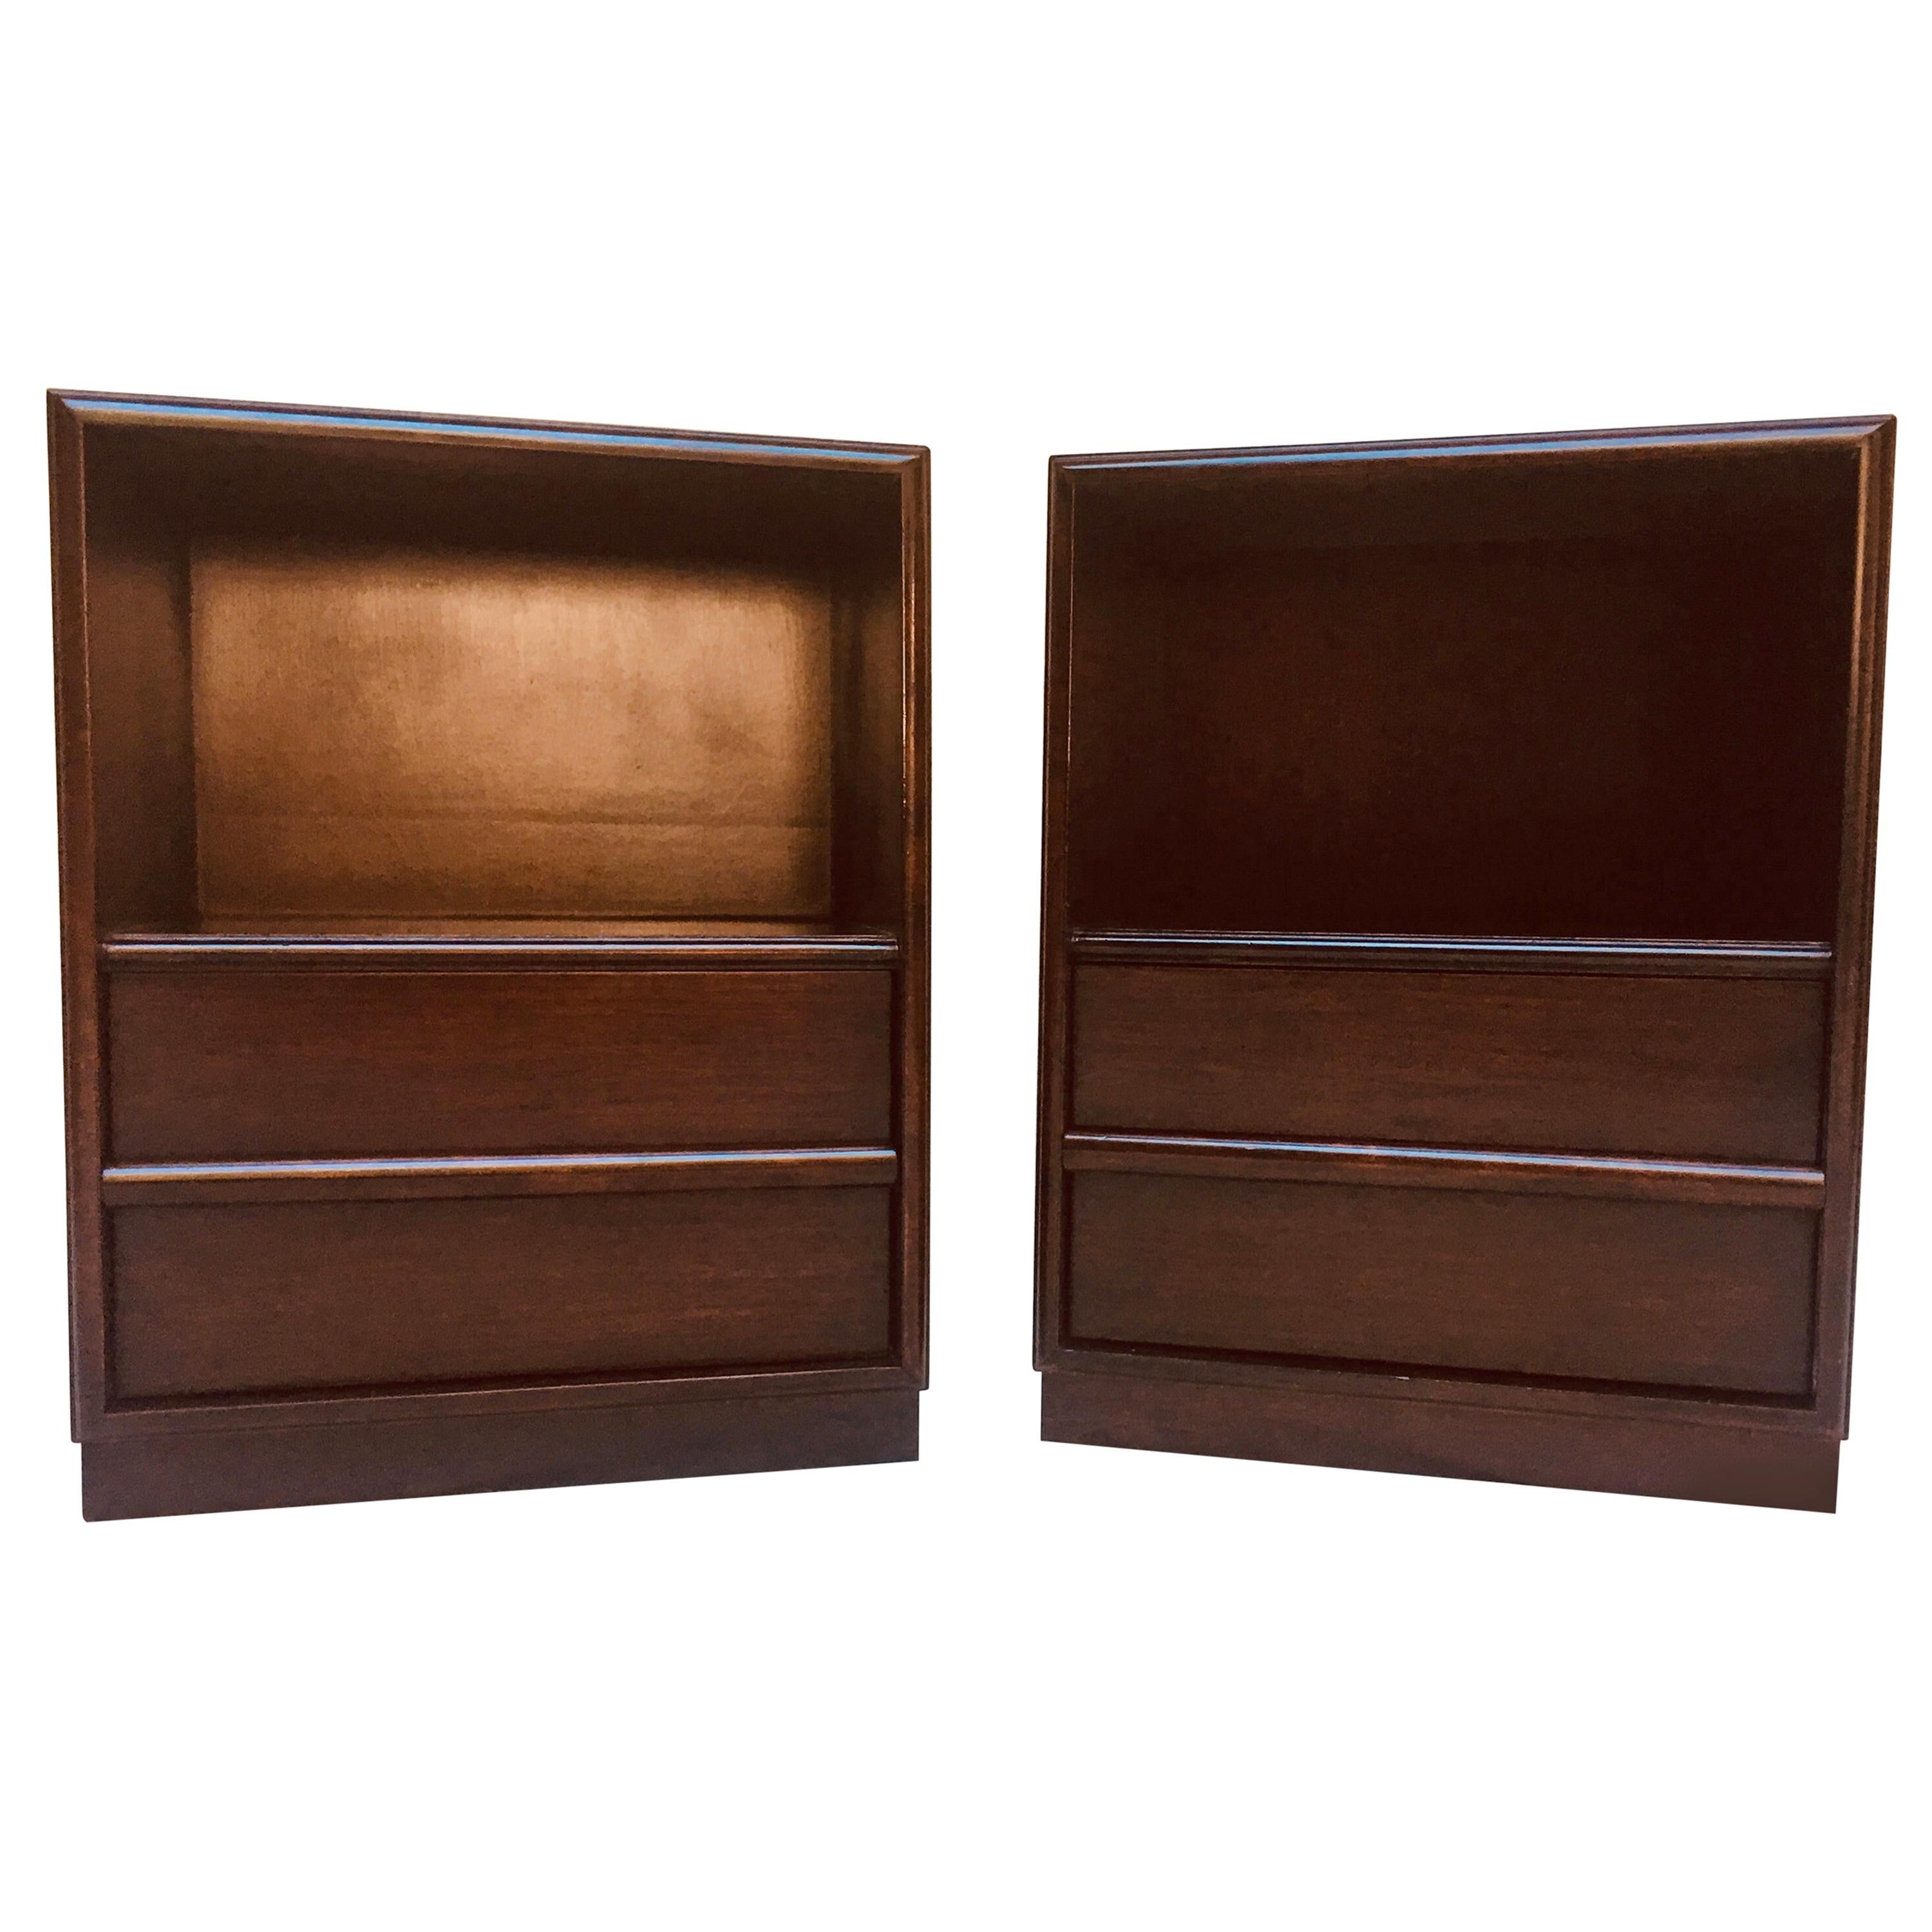 T.H. Robsjohn-Gibbingspair of nightstands designed by for Widdicomb, from the 1950s. 
The walnut nightstands are in their original Espresso lacquer that has been conserved not refinished and are in excellent vintage condition.
Please contact us if